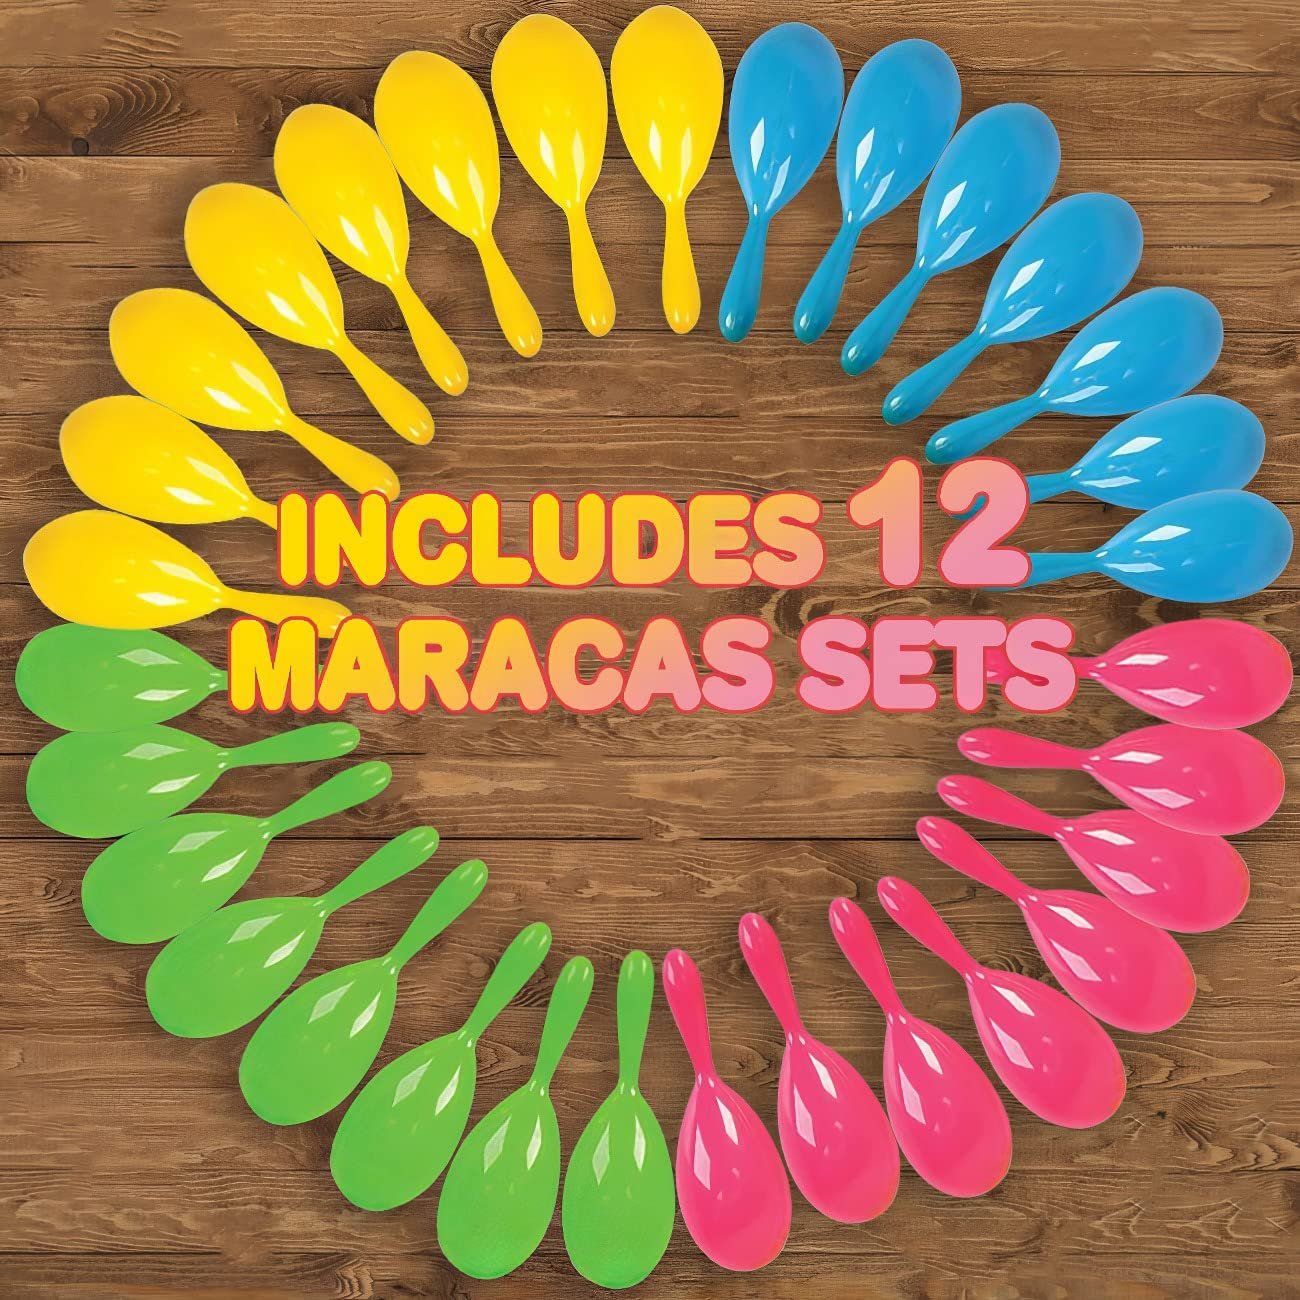 4" Plastic Maracas for Kids - 12 Pairs - Neon Music Hand Shakers - Fun Noise Makers and Toy Musical Instruments - Birthday Party Favors, Fiesta Decorations, Goodie Bag Fillers